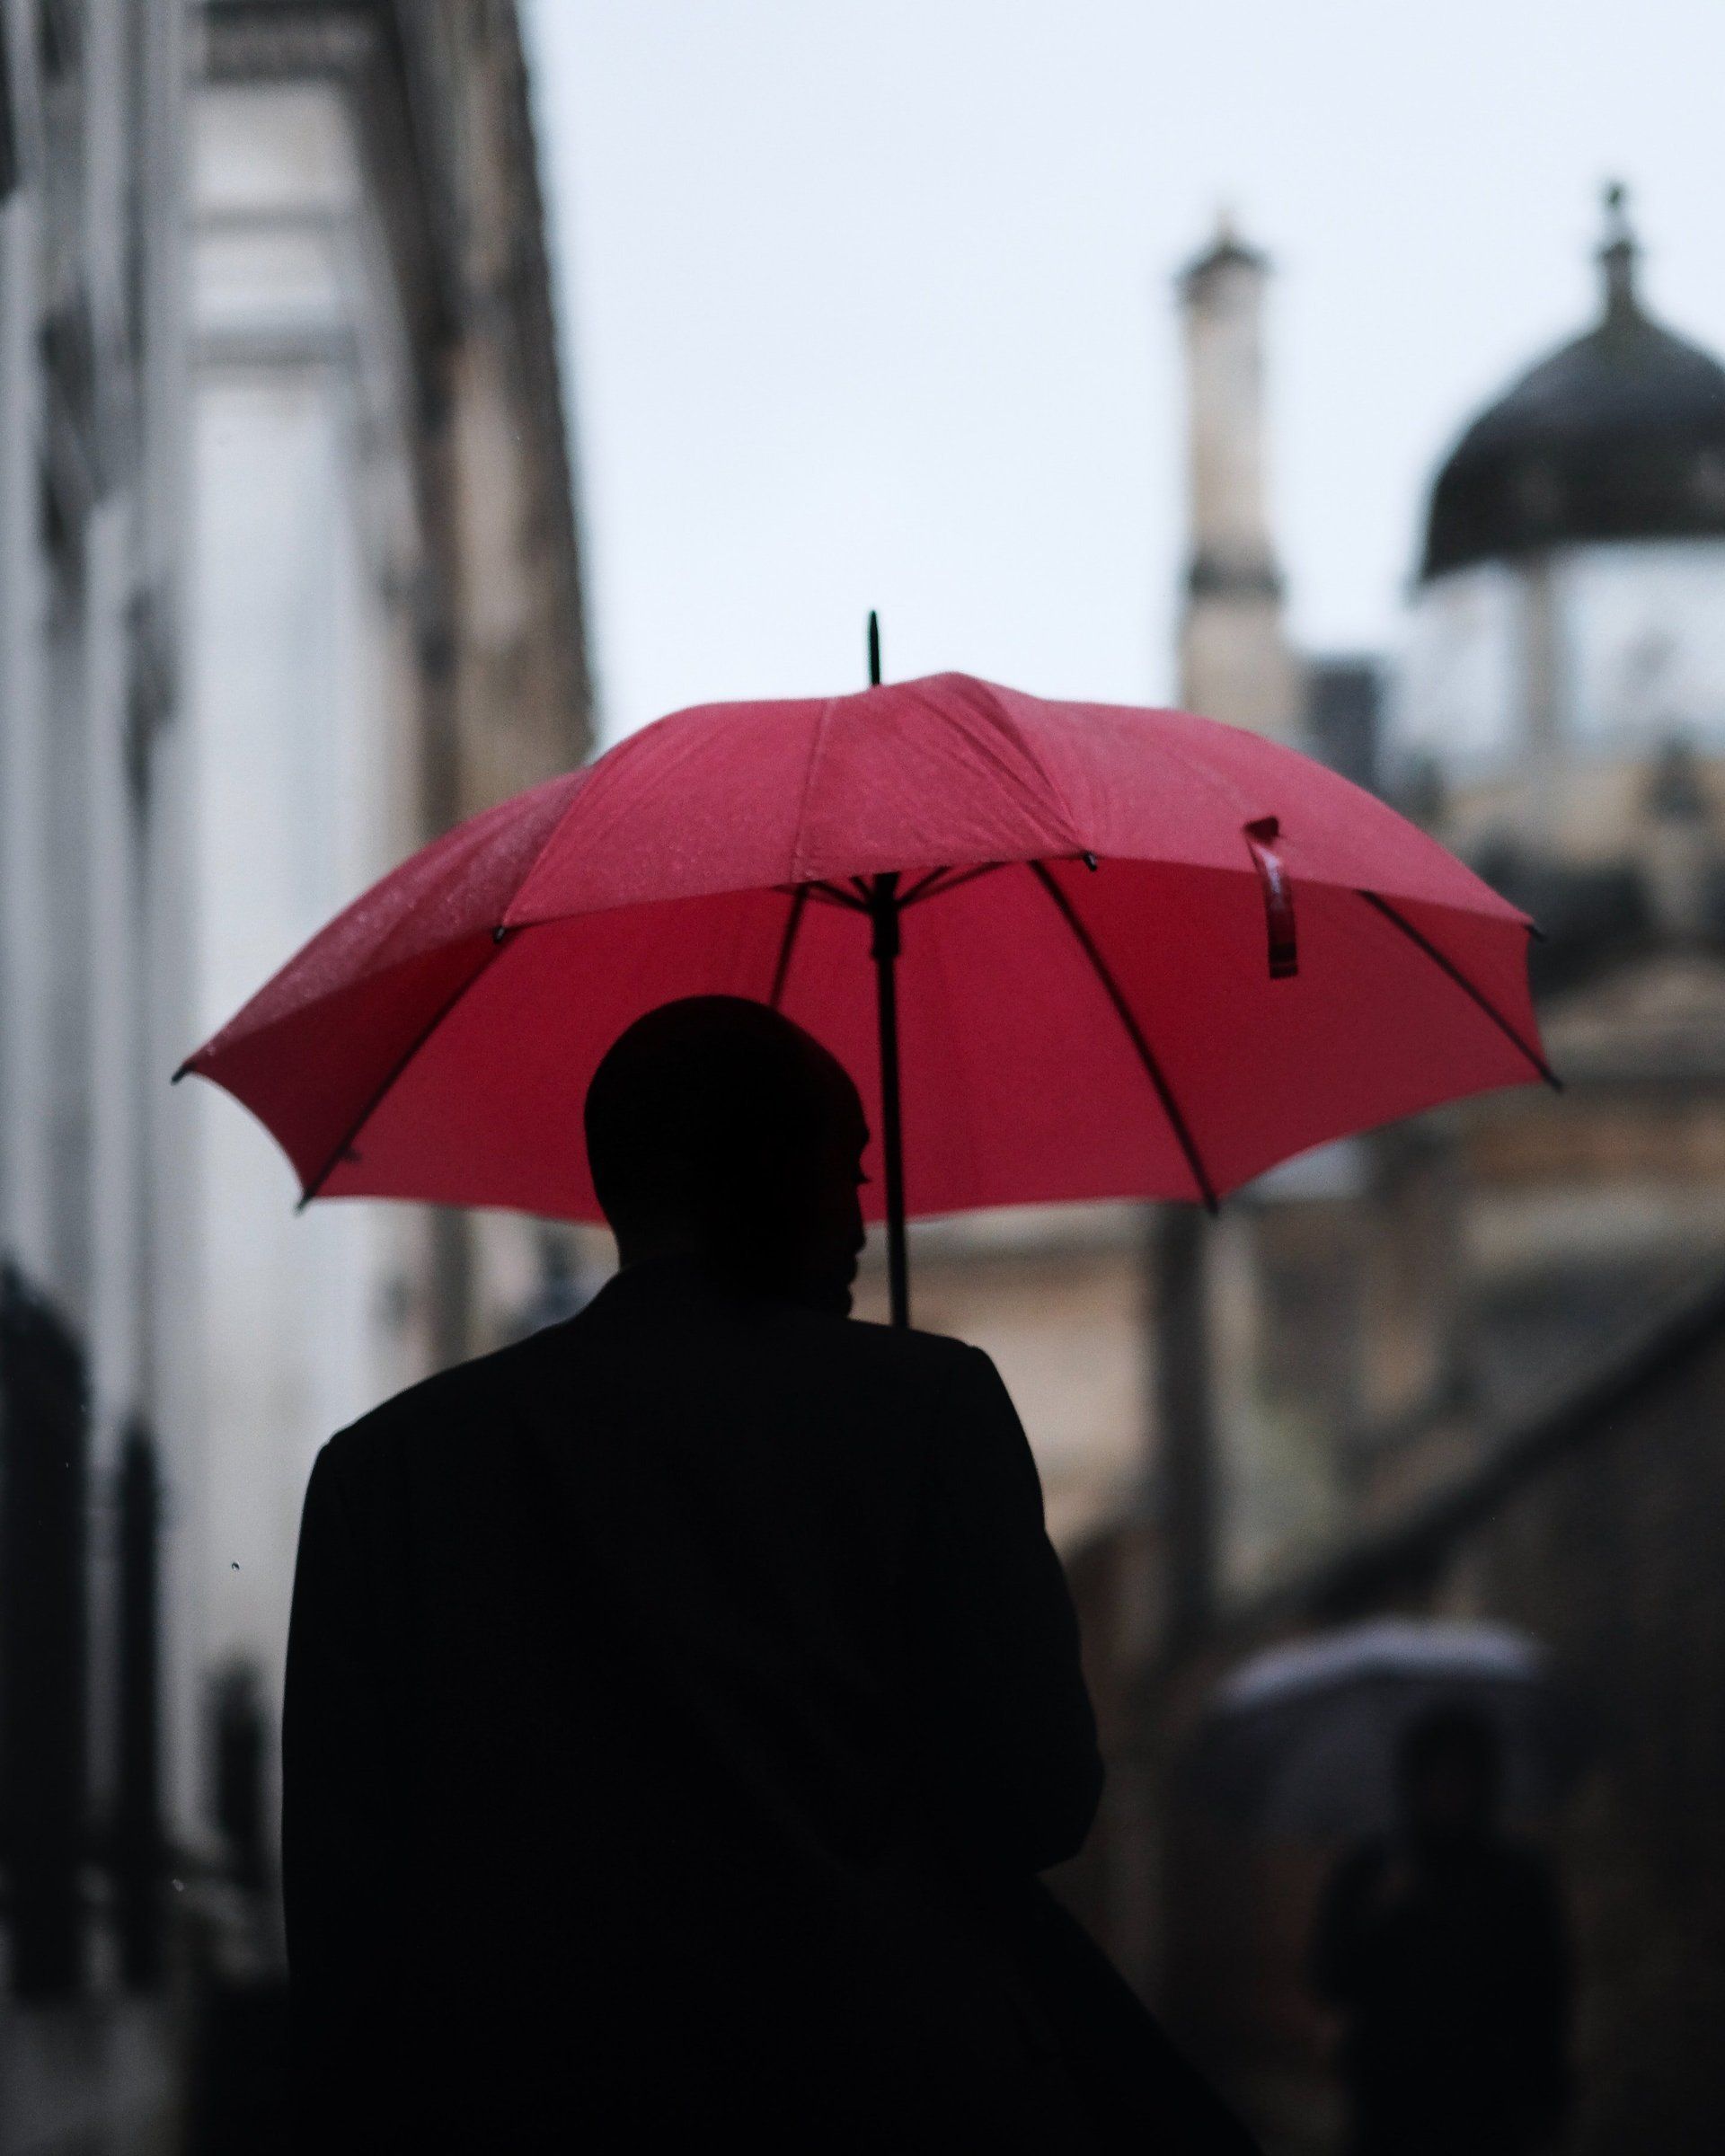 A man holding a red umbrella in the rain